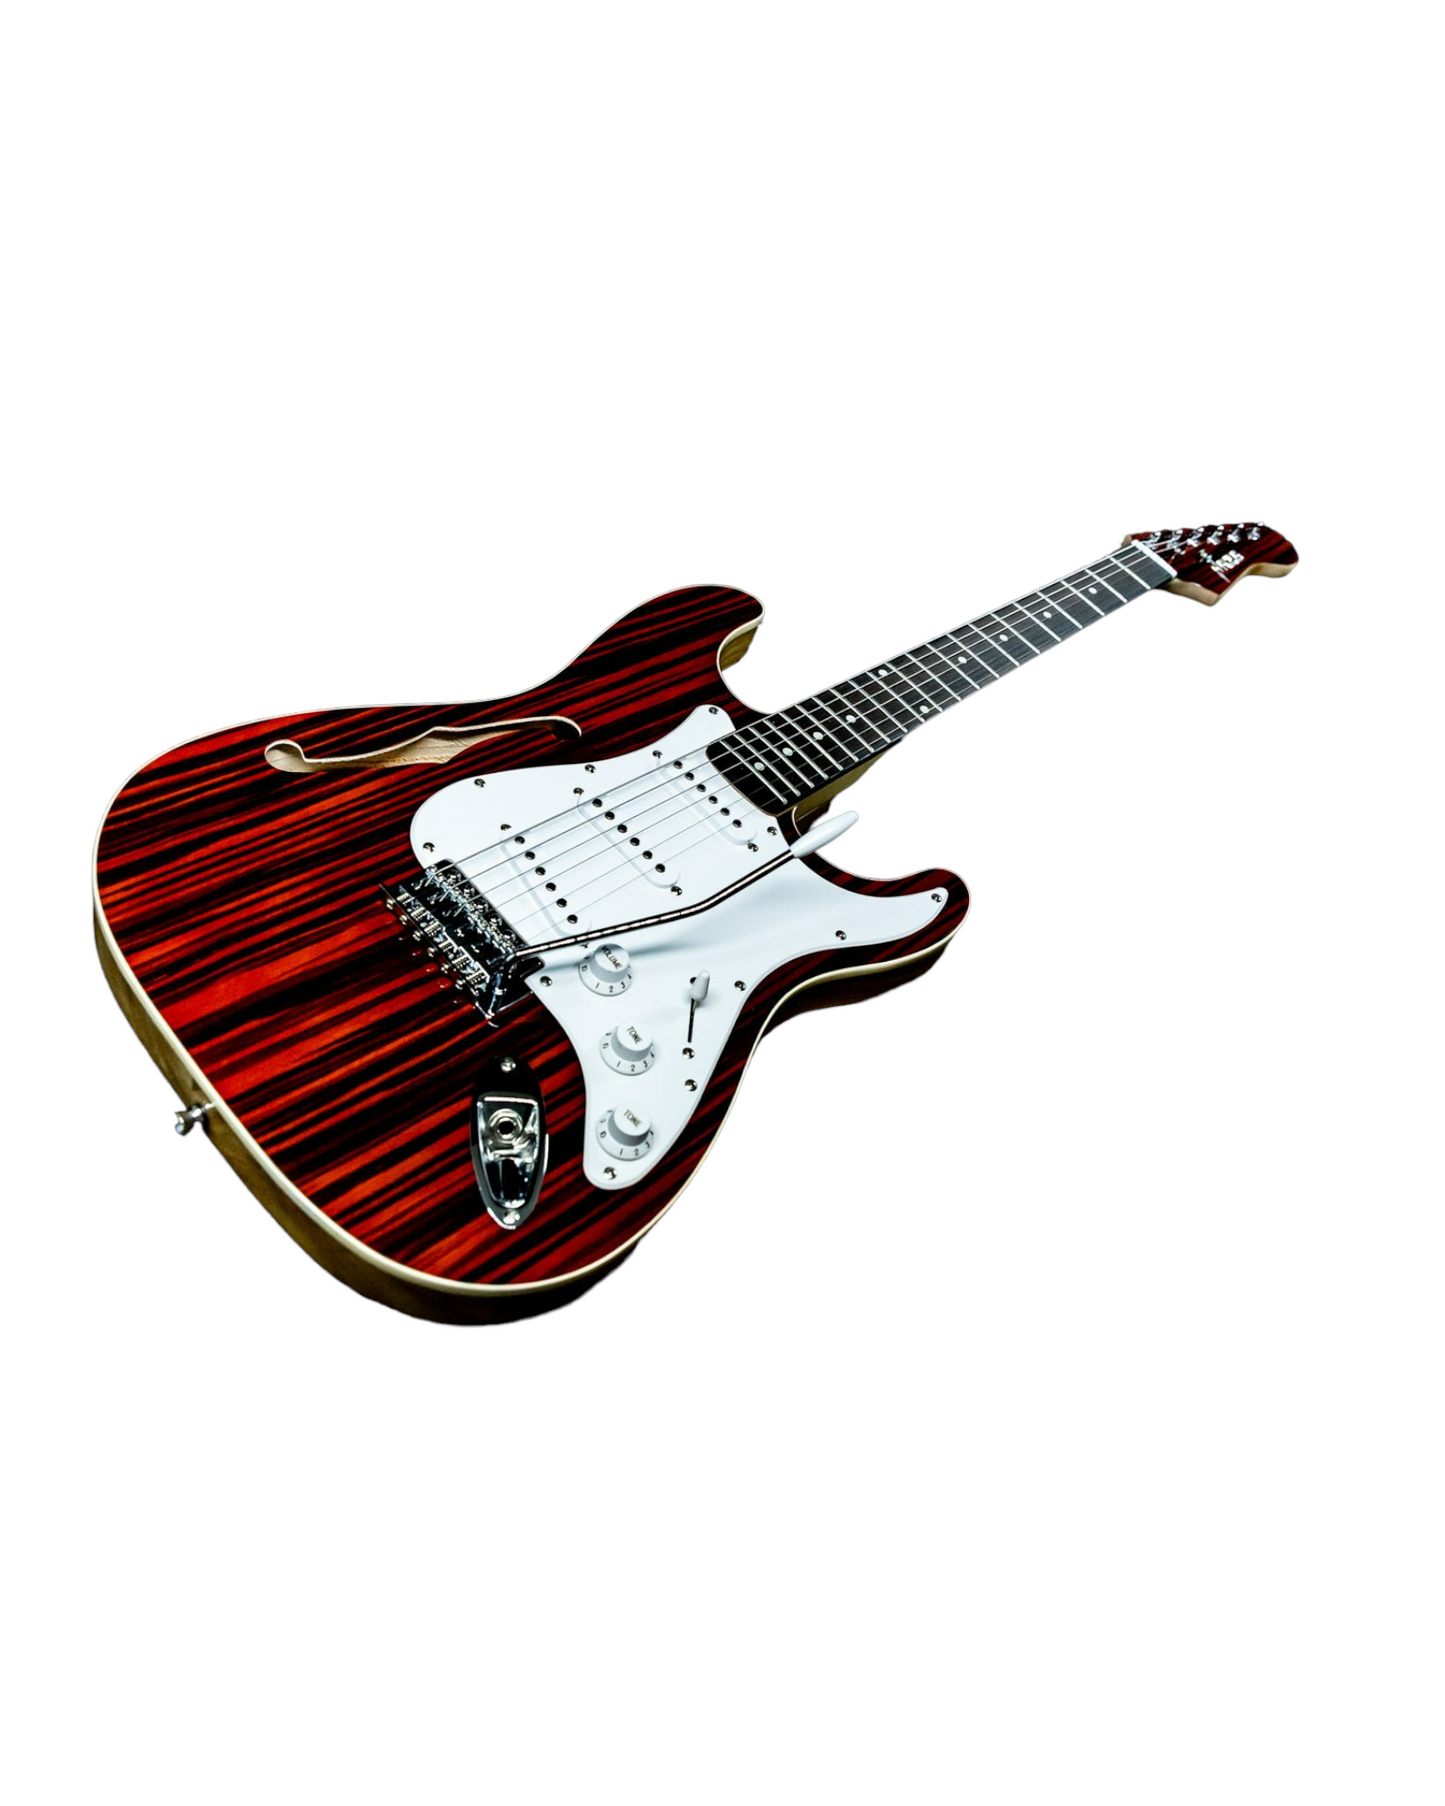 Haze HSST19SMAF088 Semi-Hollow Cocobolo Red HST Electric Guitar, 10W Amp, Accessories Pack